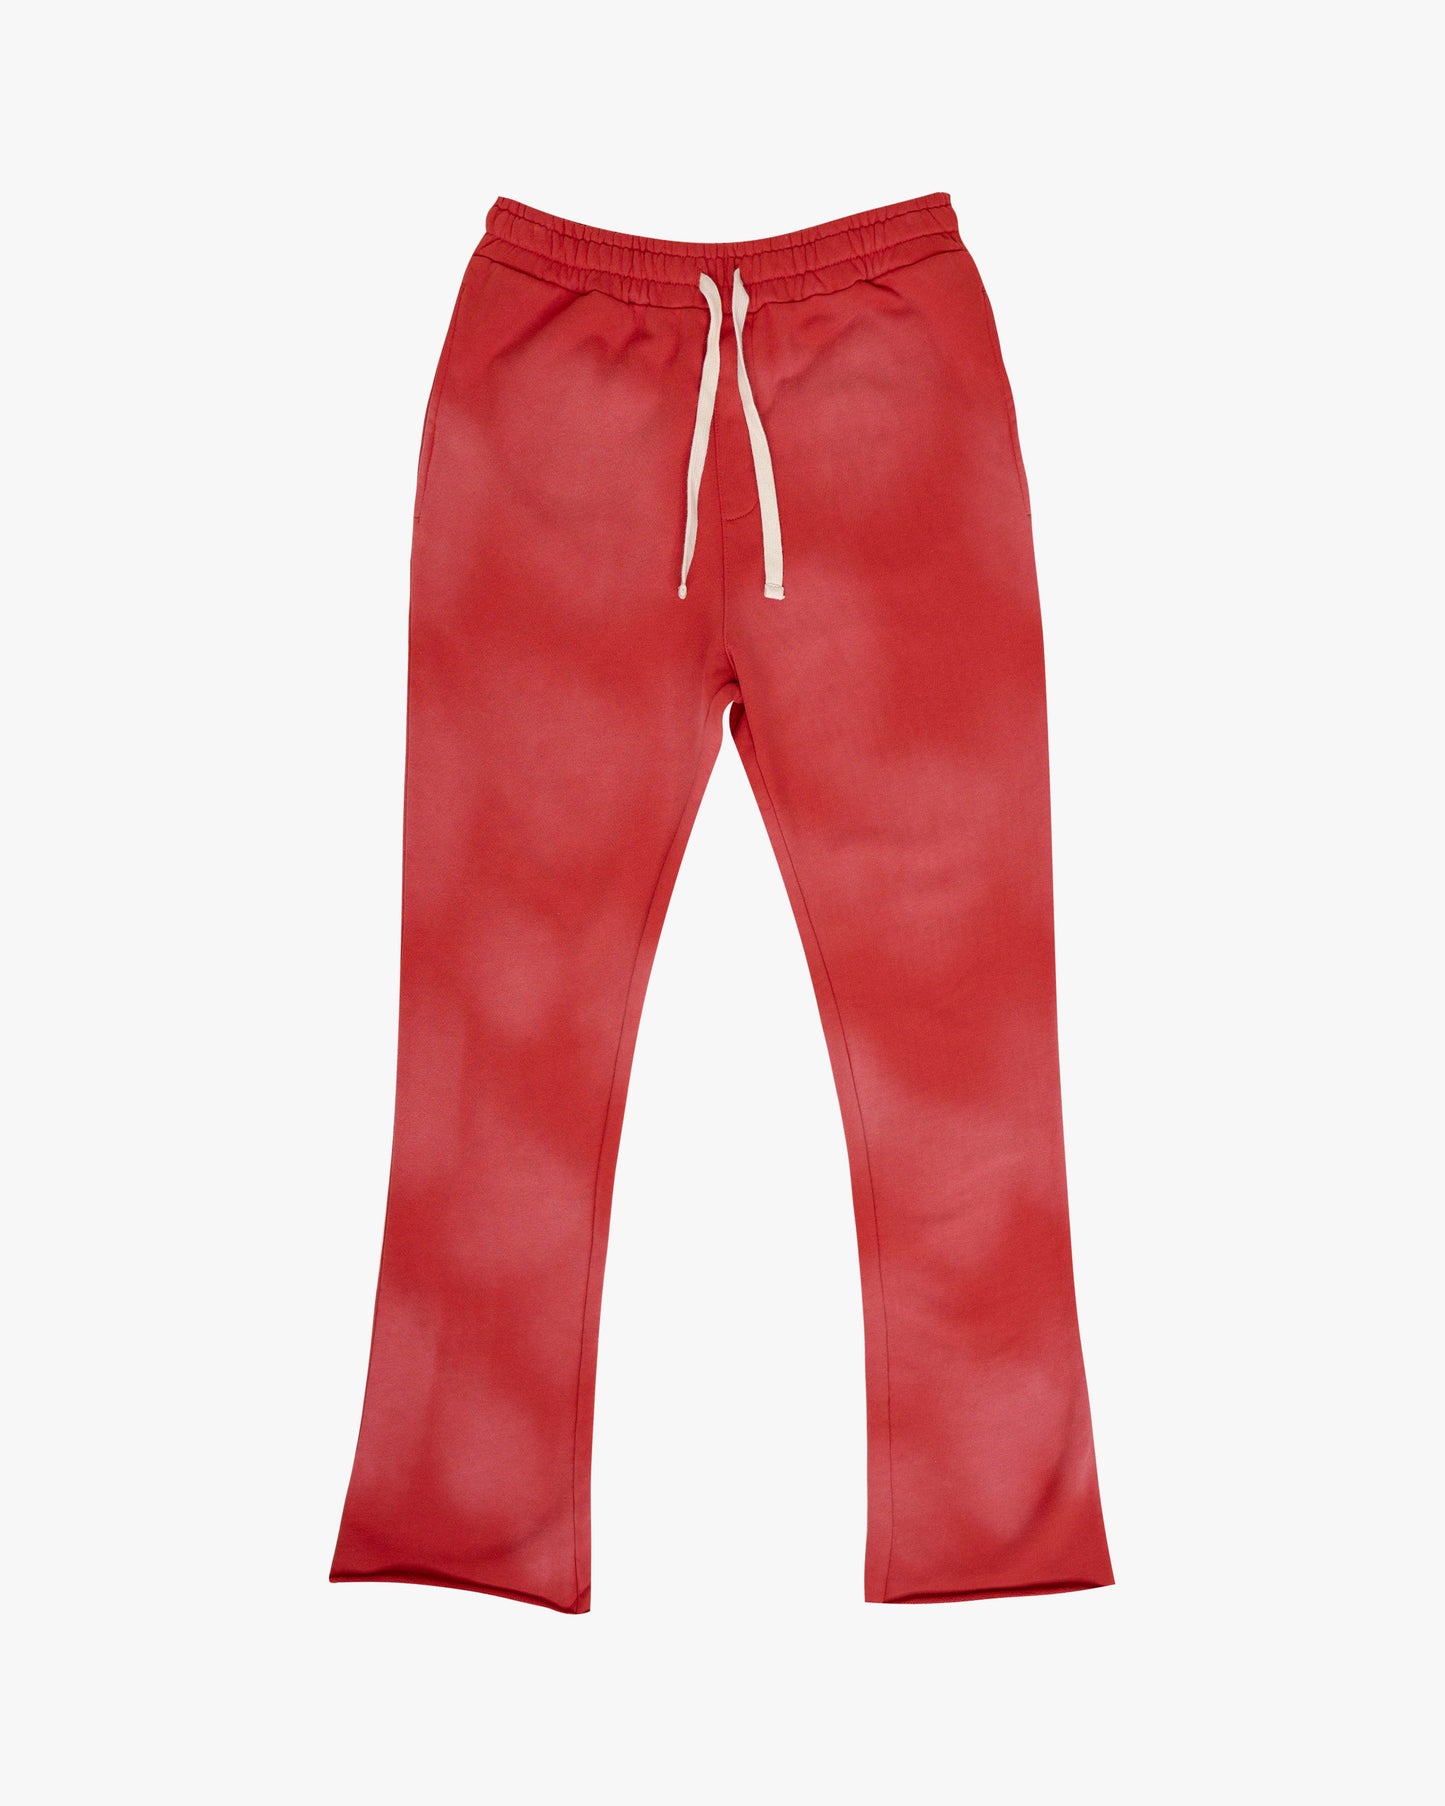 EPTM SUN FADED SWEATPANTS-RED